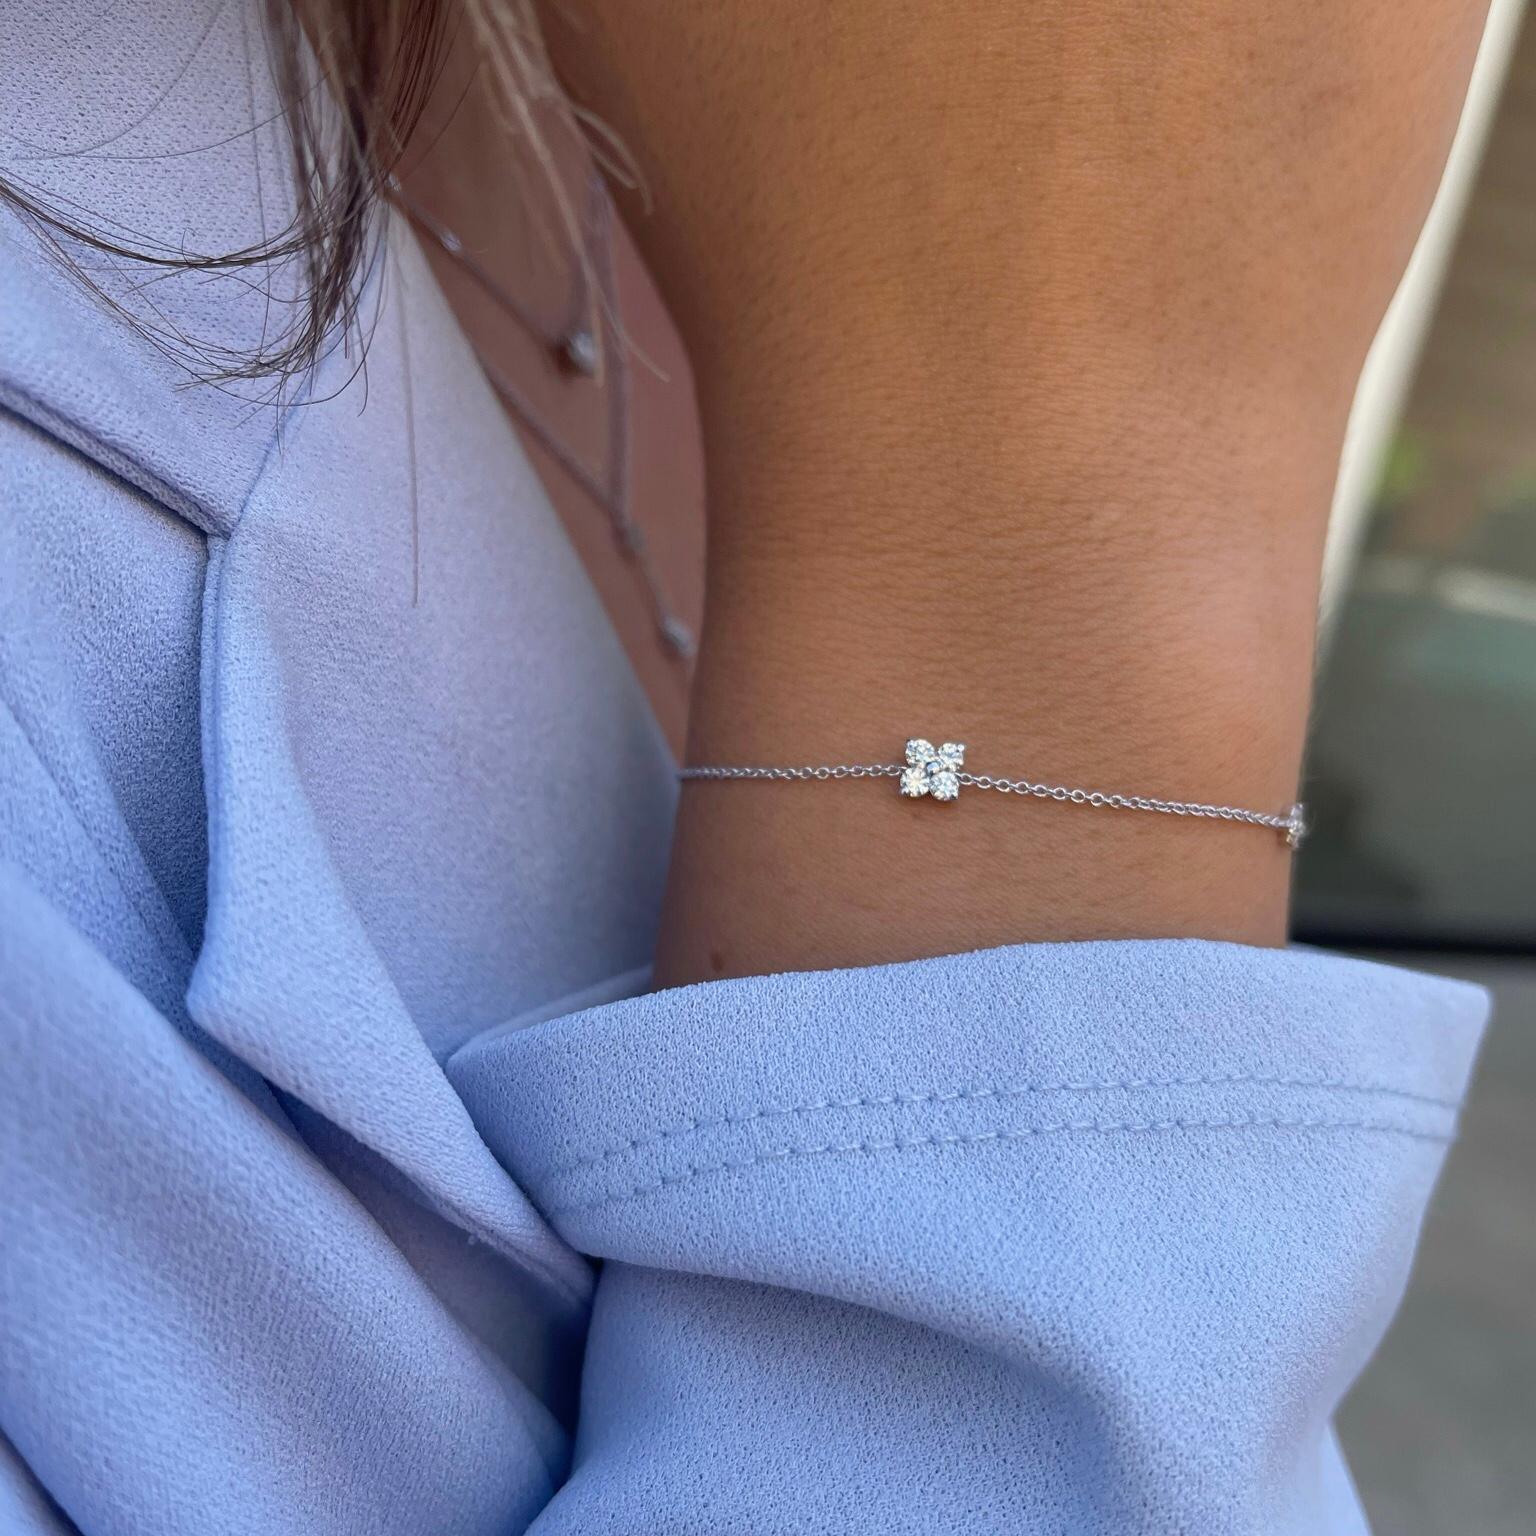 0.24 Carat Diamond Flower Petal Bracelet in 14 Karat White Gold, Shlomit Rogel

Beautiful sparkle meets a wonderfully elegant design in this dainty chain bracelet. Crafted from 14k solid white gold, the bracelet features a diamond flower at the